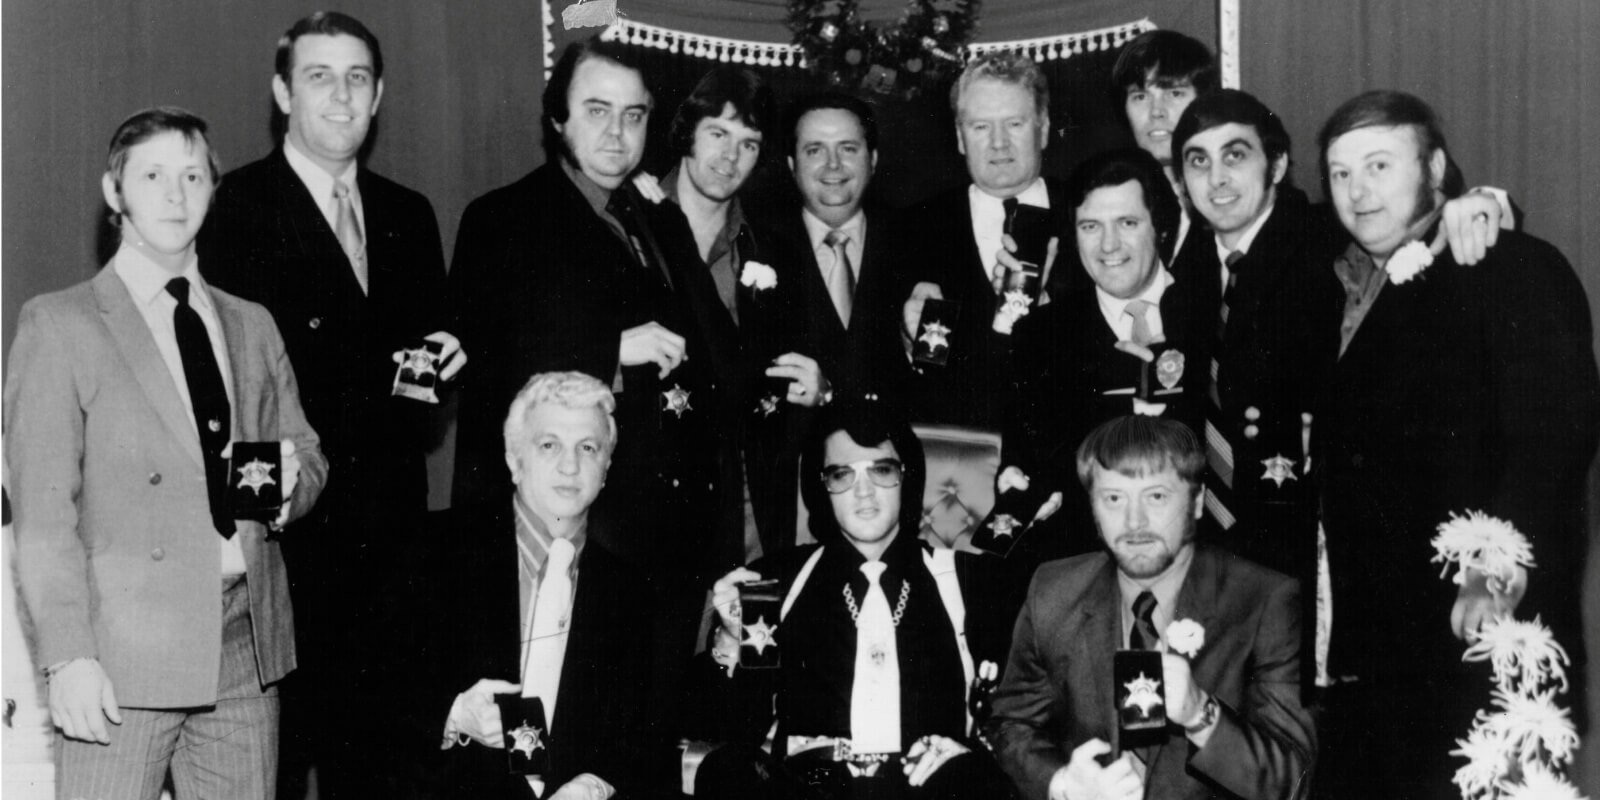 Elvis Presley and members of The Memphis Mafia pictured in 1970.